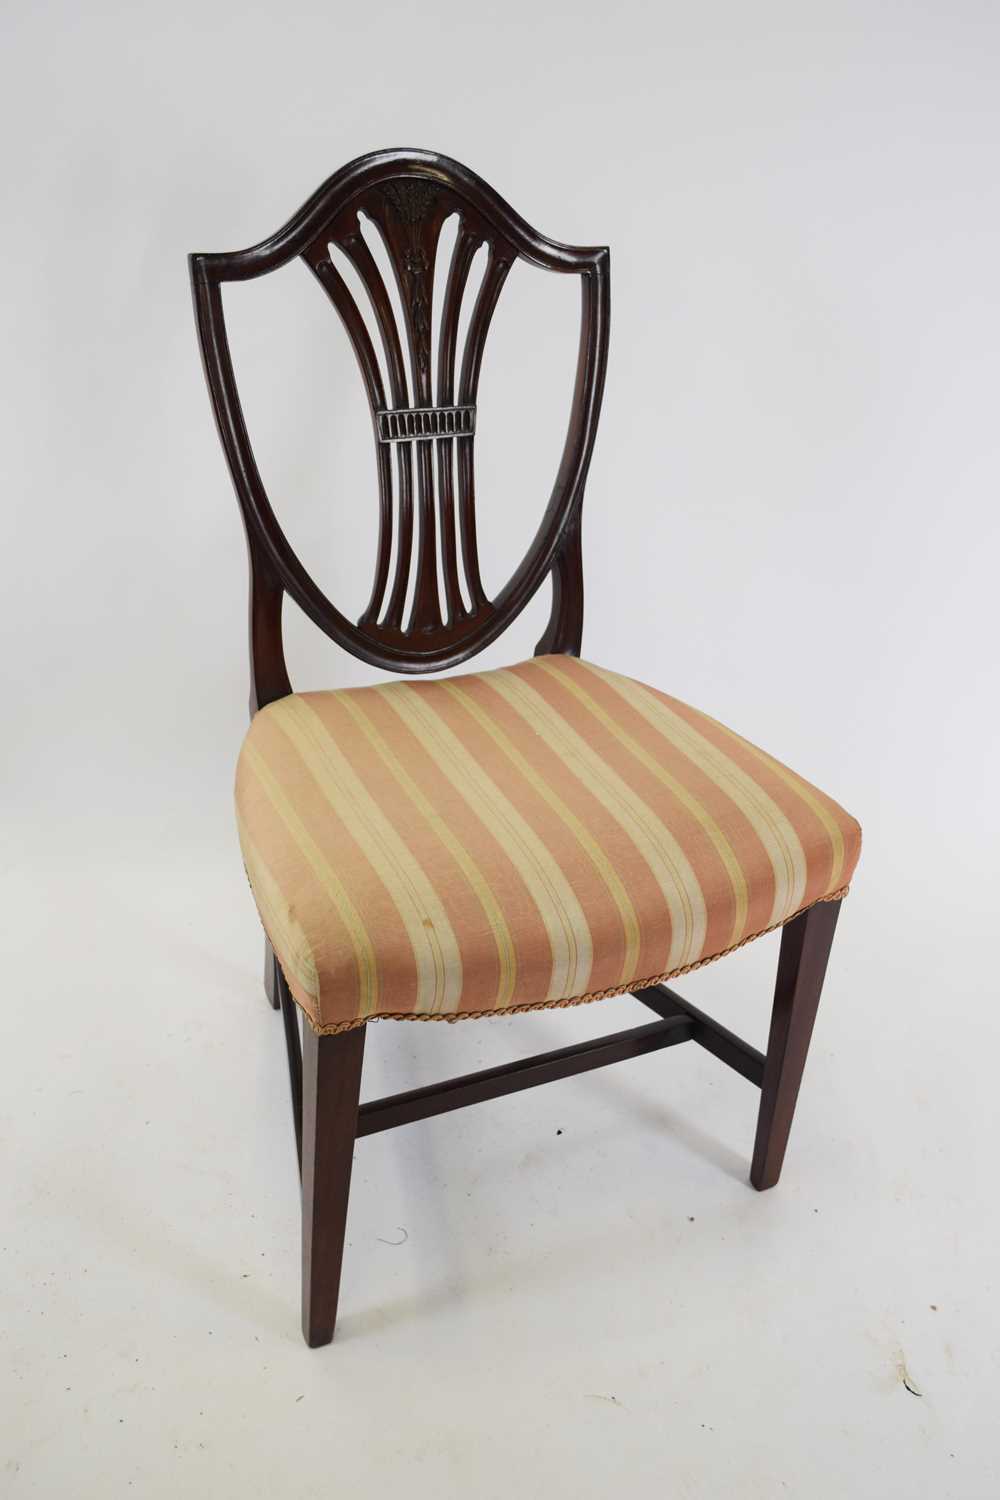 Mahogany framed shield back dining chair decorated with wheatsheaf detail and upholstered in striped